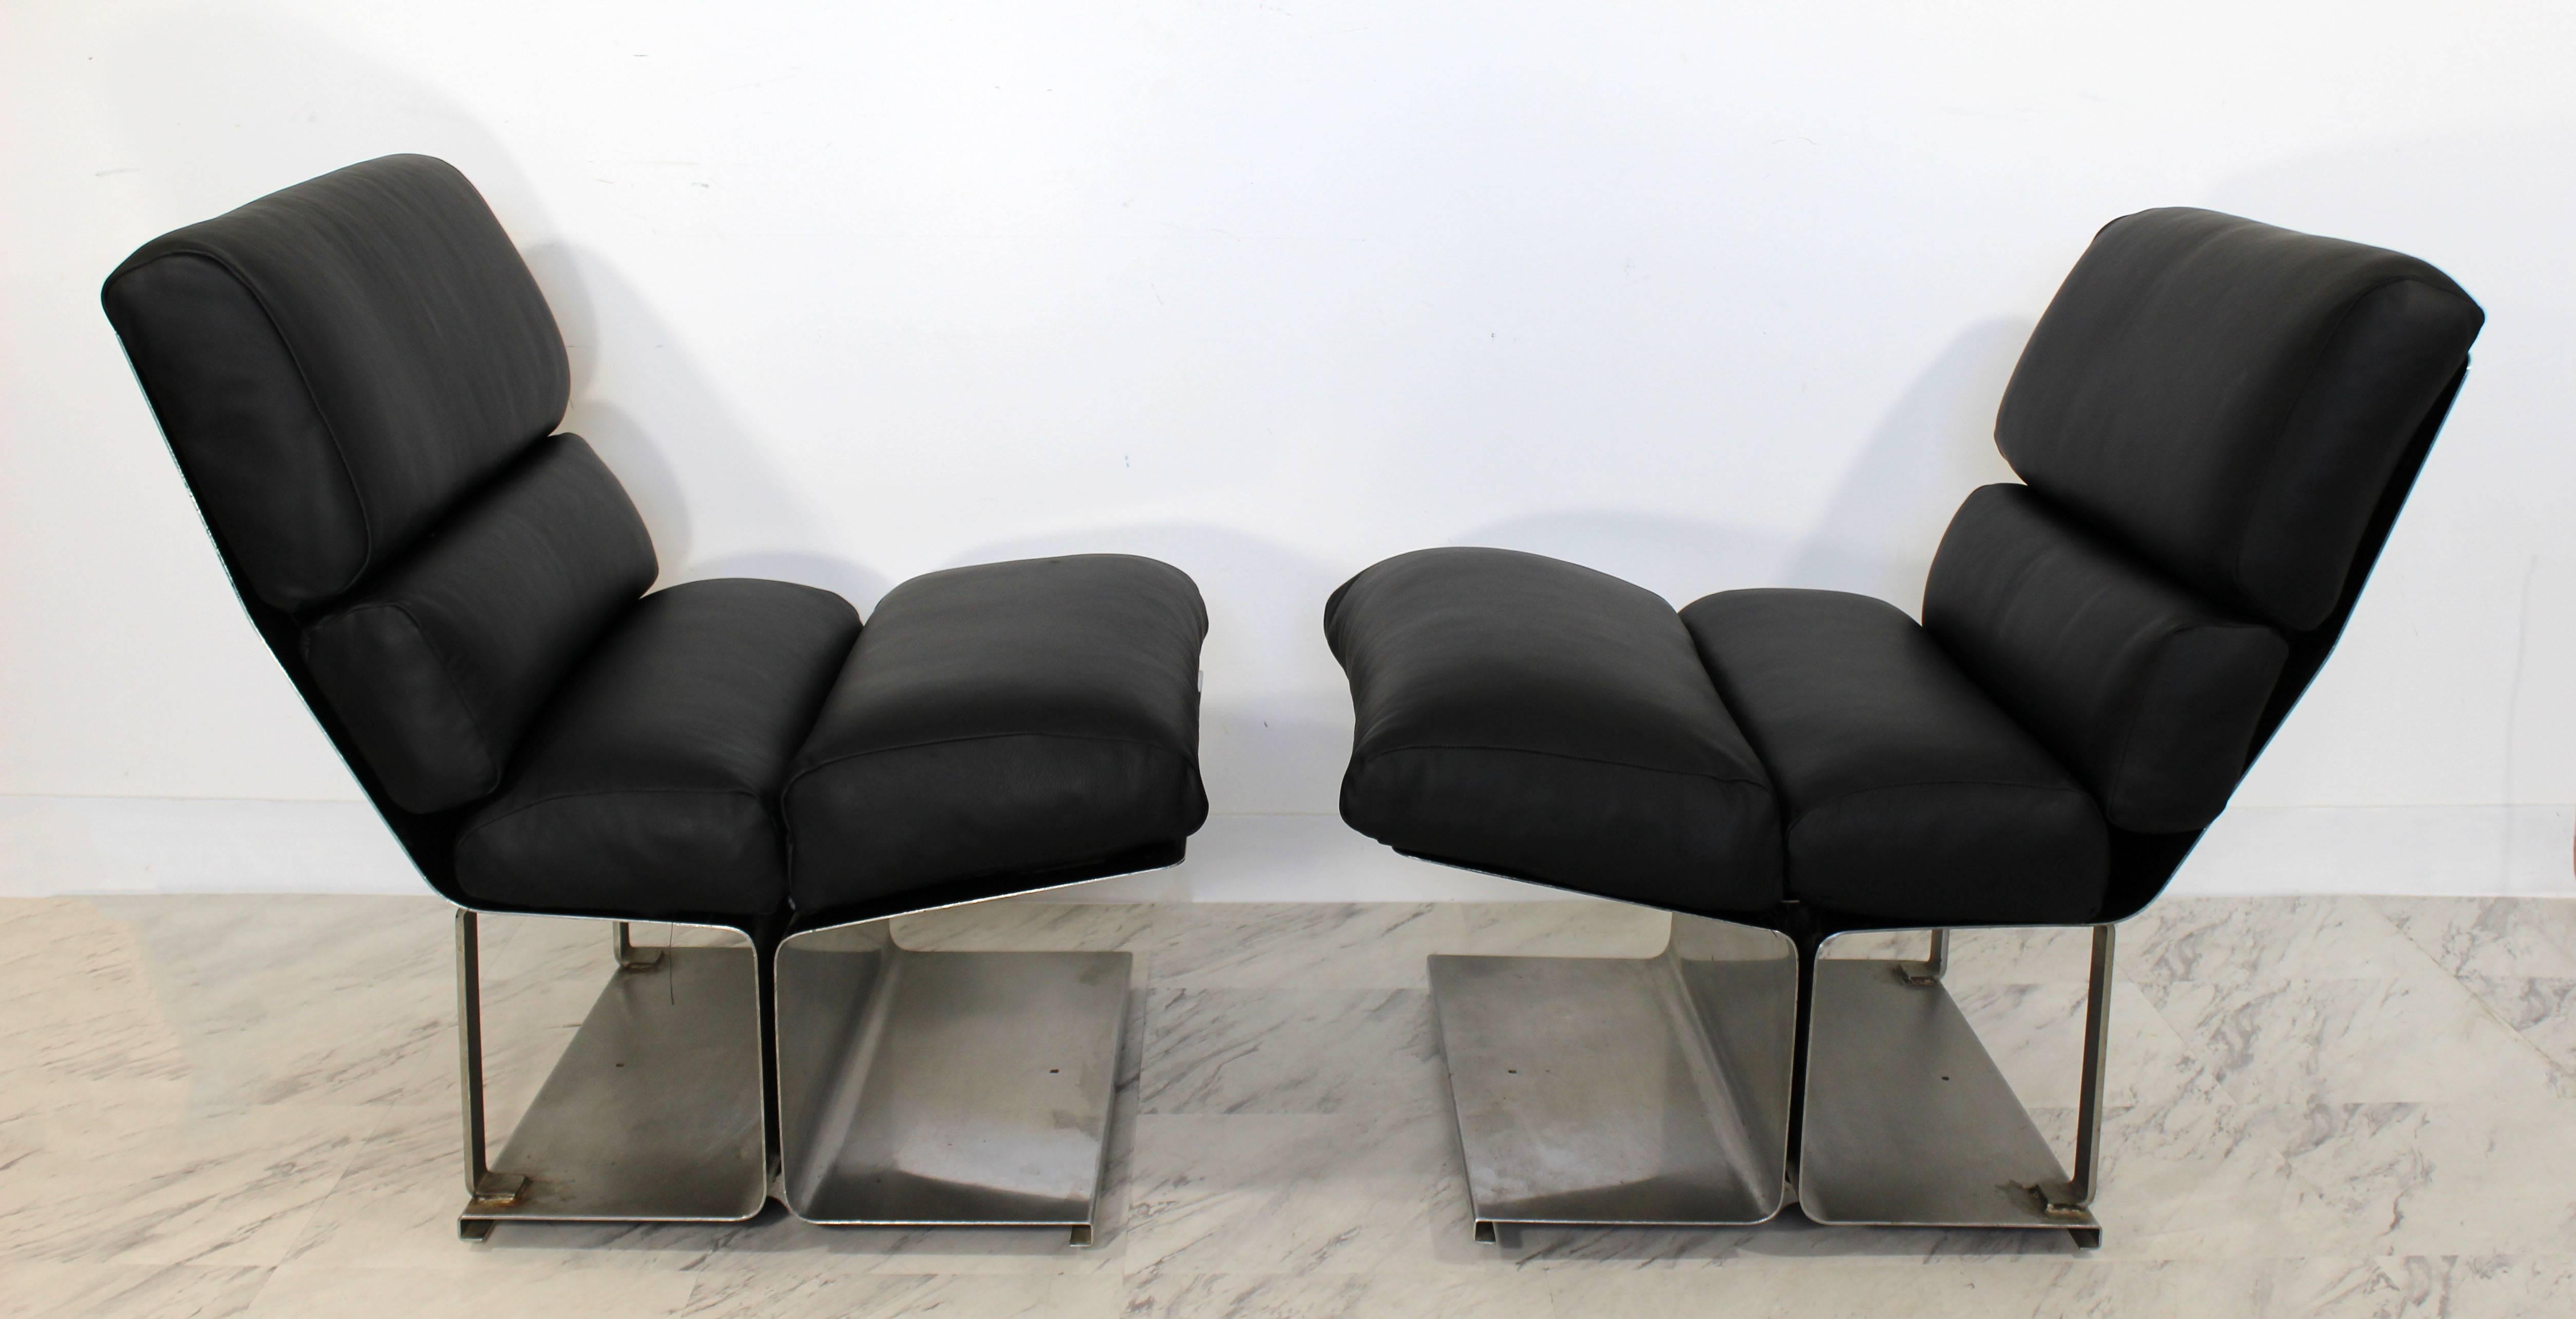 For your consideration is a magnificent pair of steel and black leather hide lounge chairs, by Paul Geoffroy by Uginox, France in the 1970s. Just back from being professionally reupholstered in the finest black leather hide. In excellent condition.